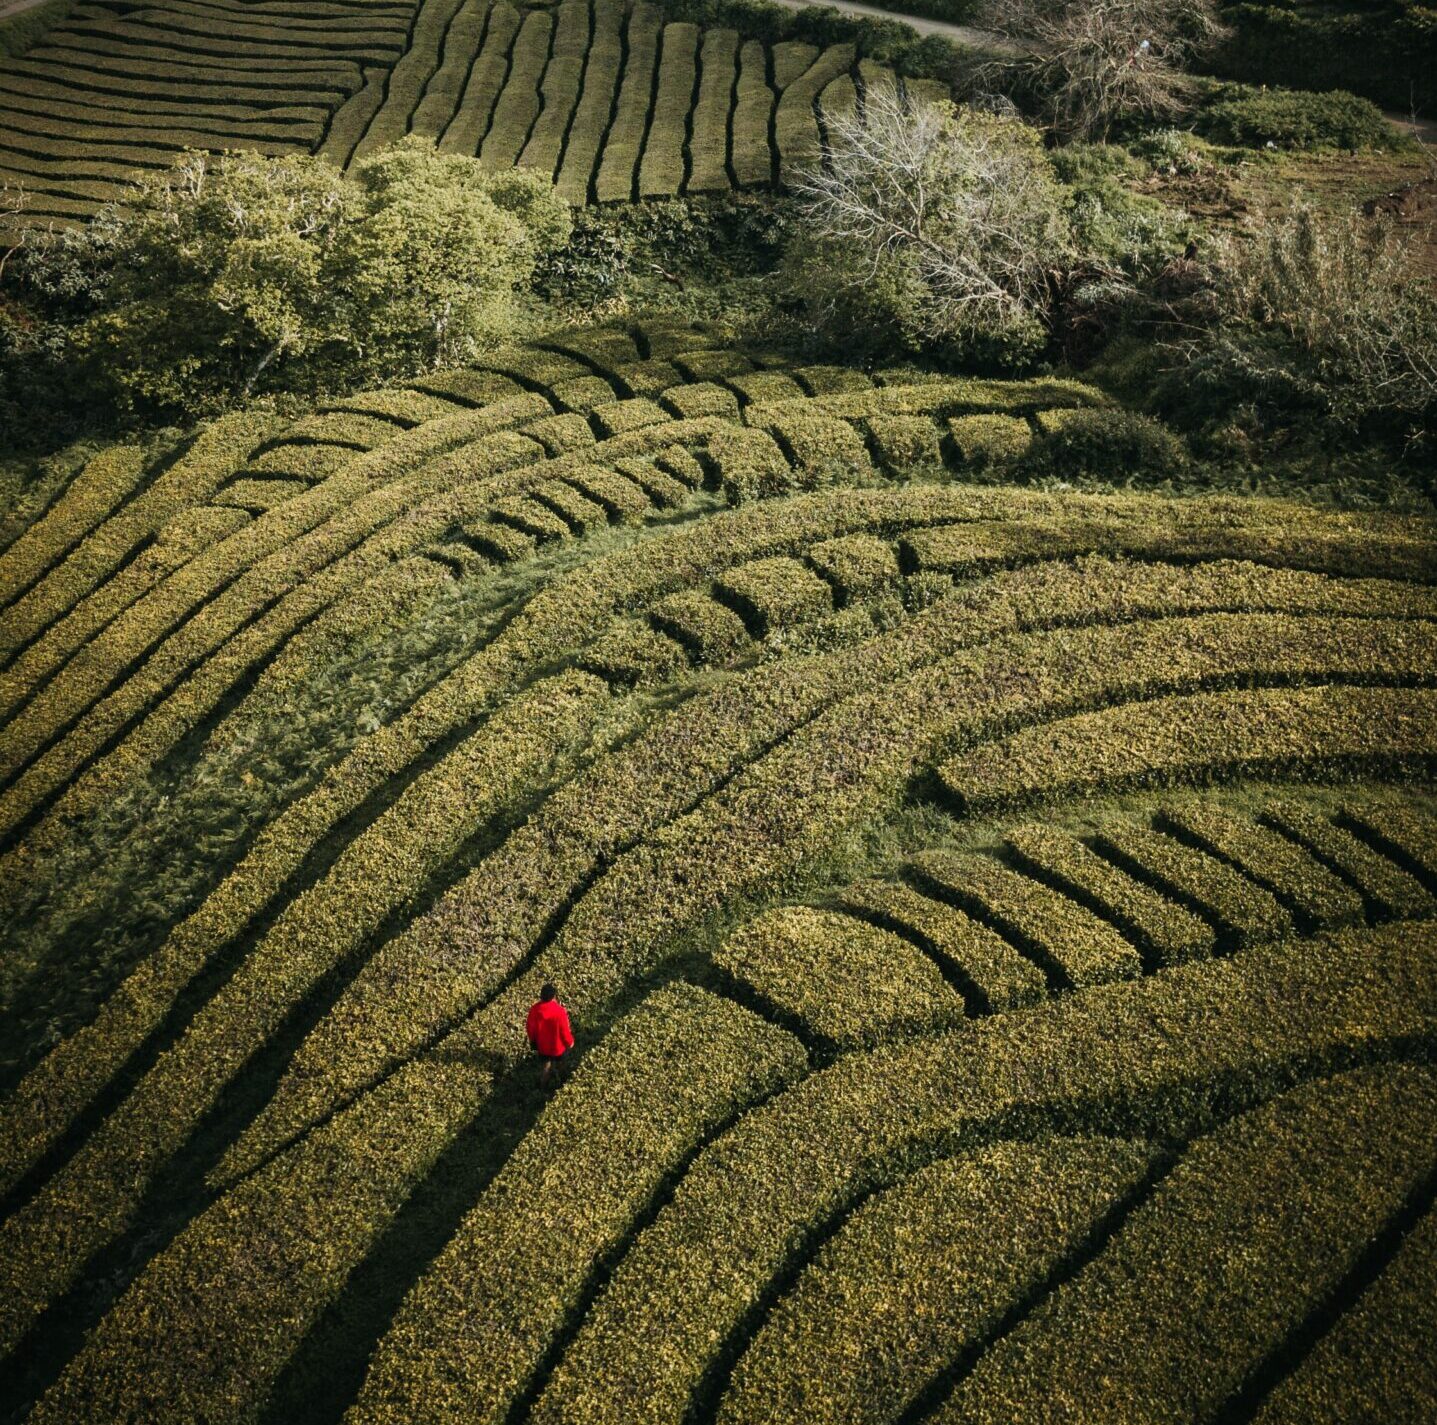 s/4hana : person walking in a red jacket through a field